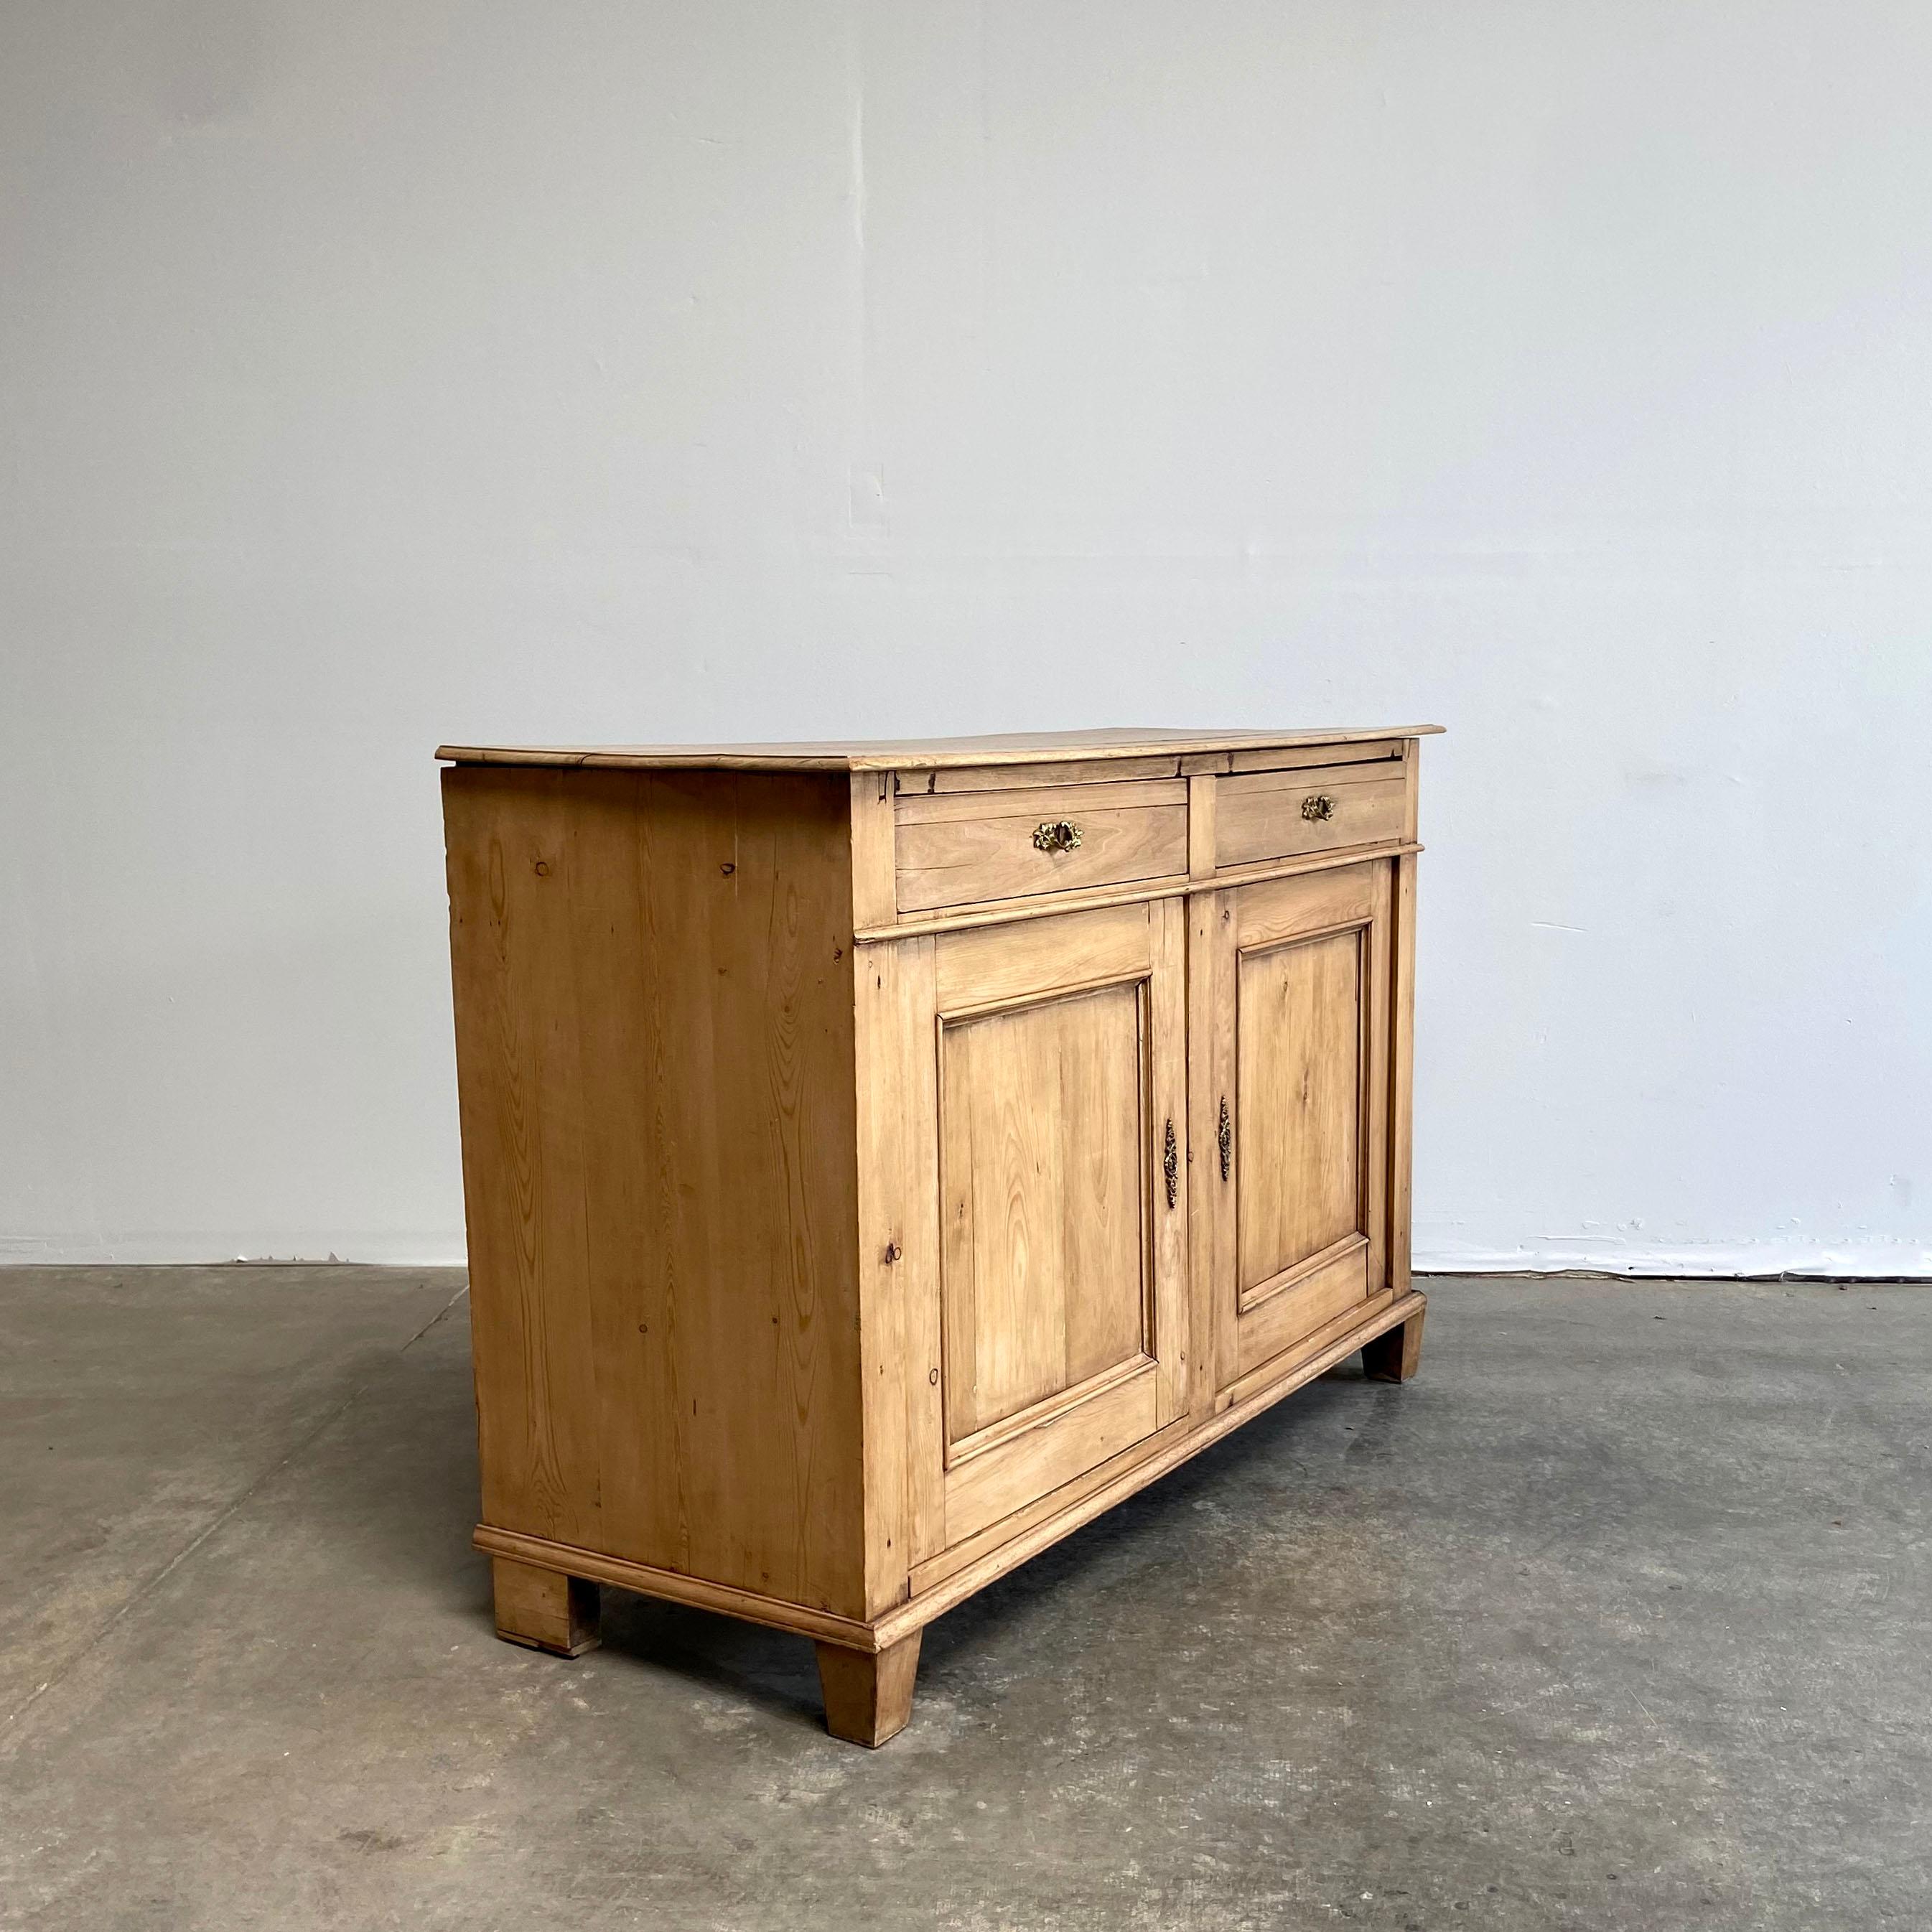 20th Century European Pine Sideboard or Cabinet. The doors open with ease, and have the original brass hardware. Sturdy, and ready for everyday use.

55”W x 21”D x 37”H
      